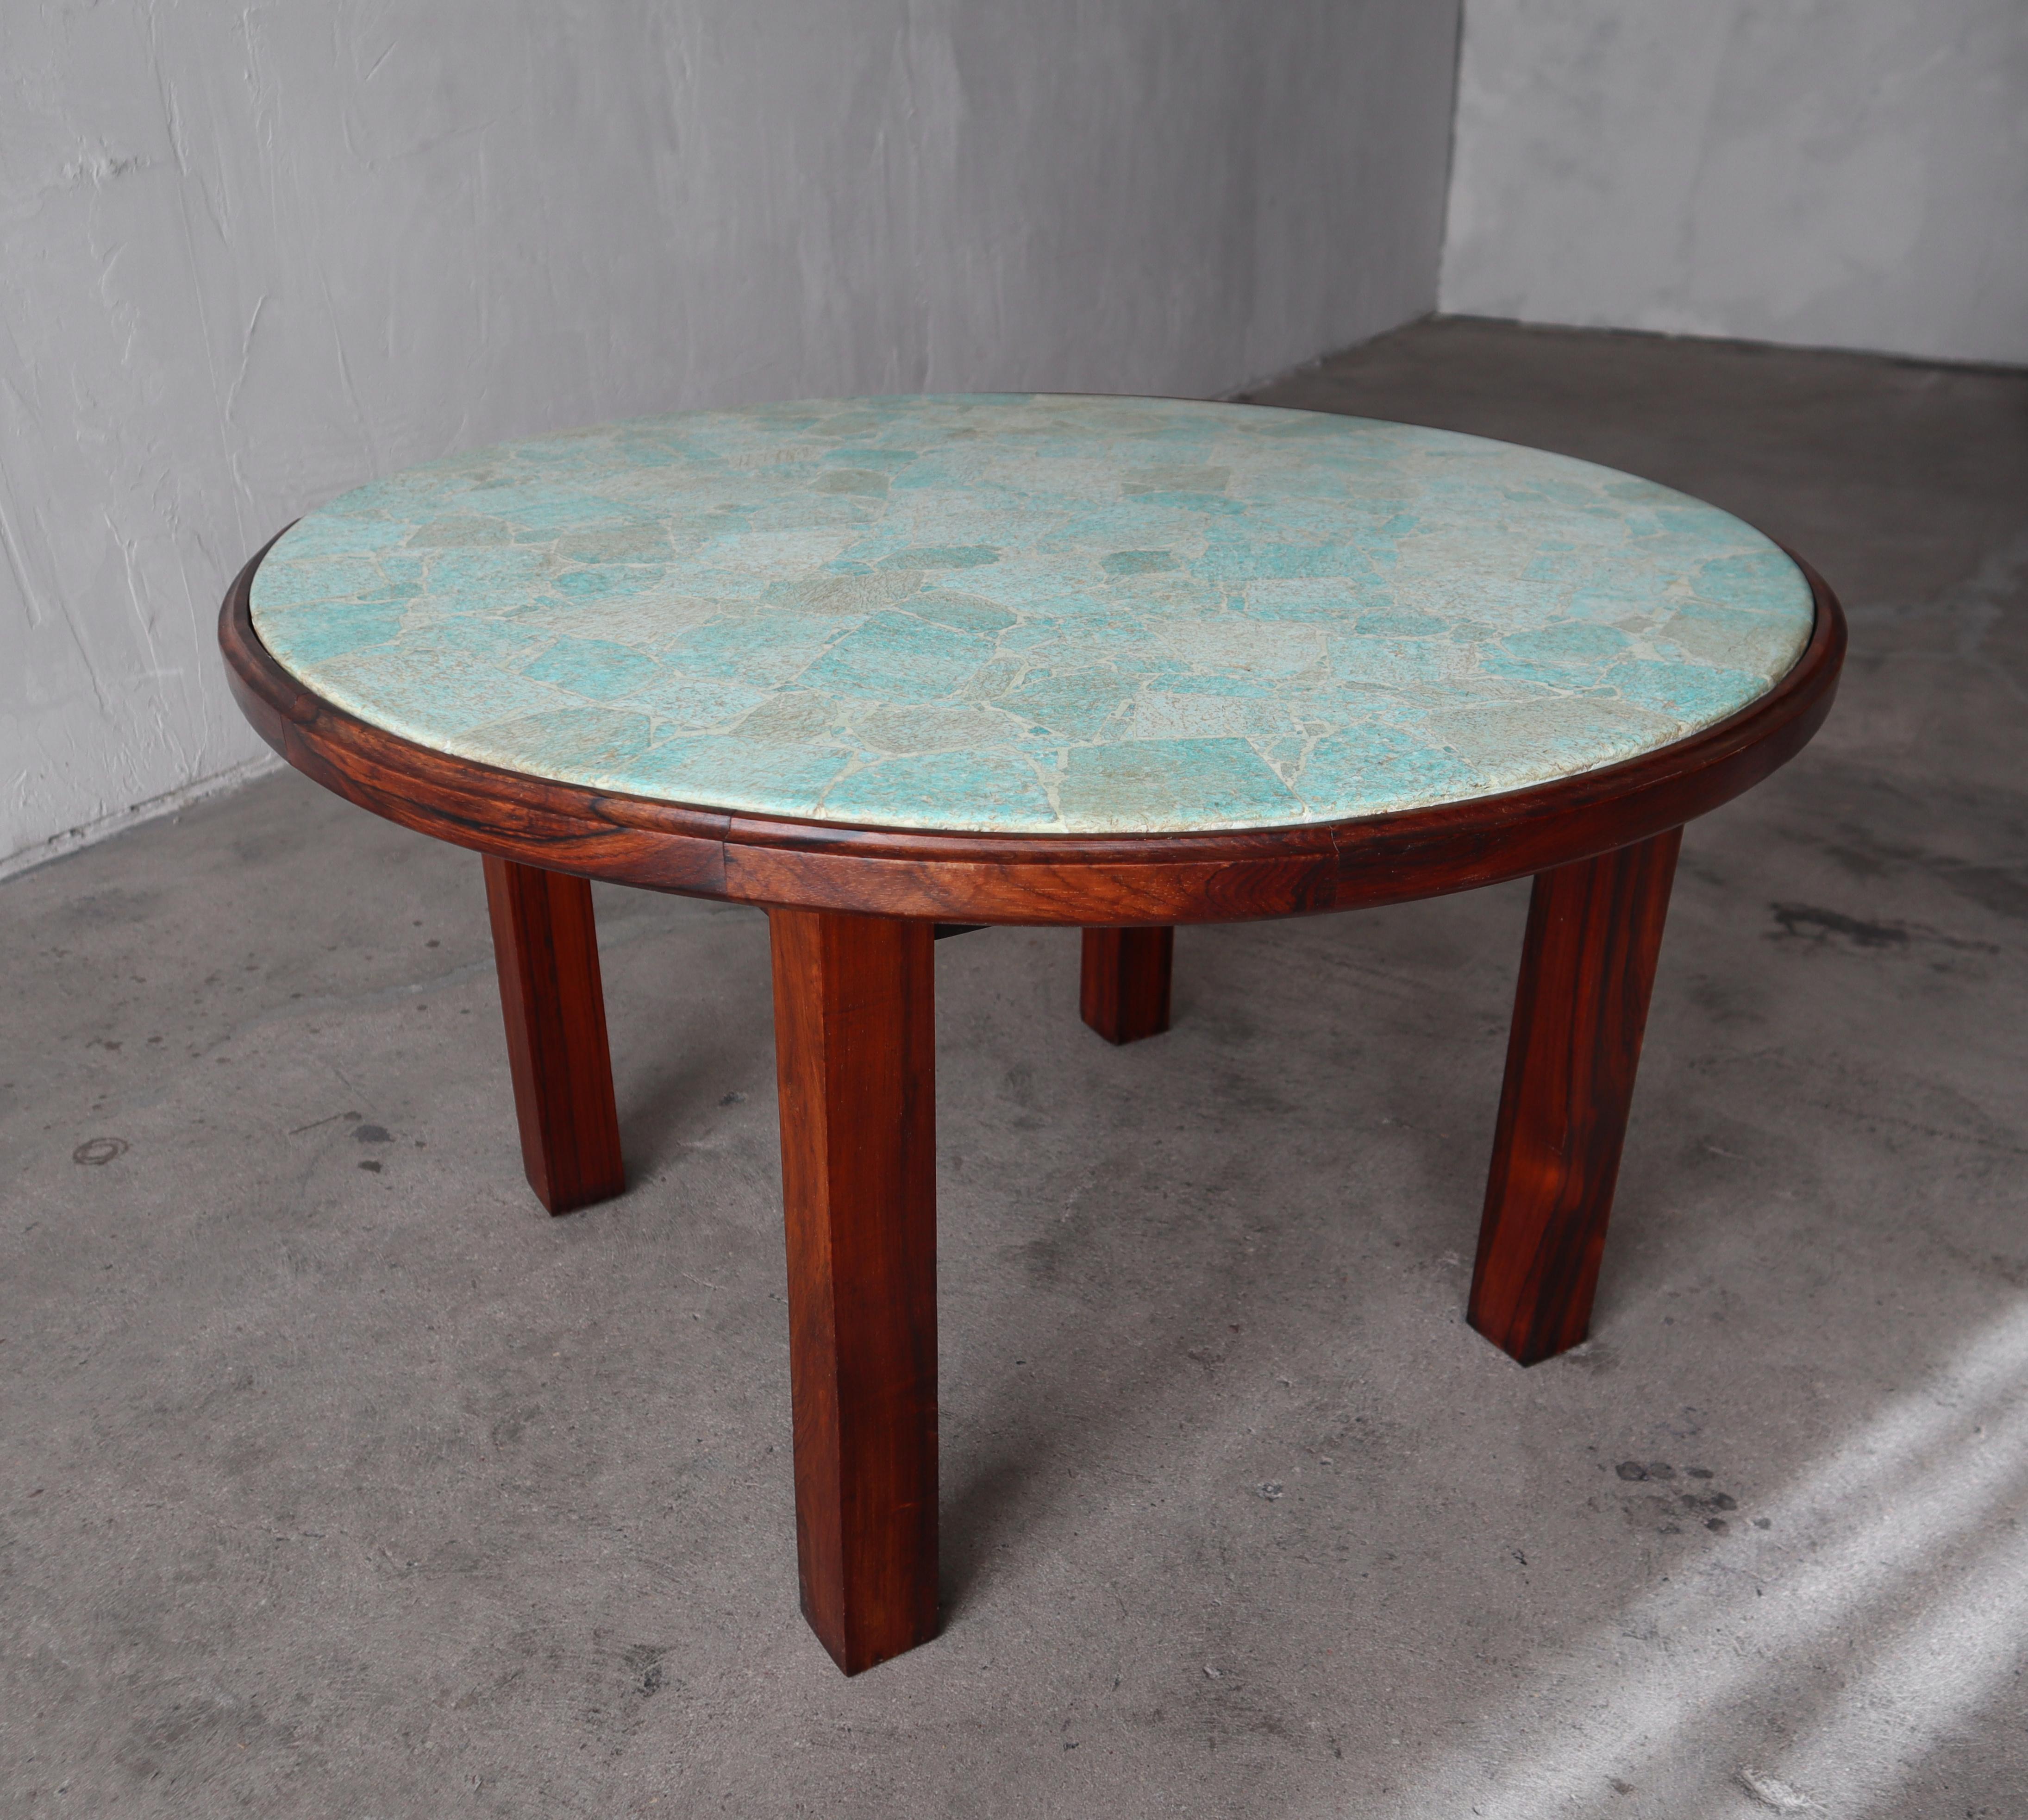 We purchased this incredible table from the original owner who had it custom made in Rio de Janeiro, Brazil in the 1960s. The table is constructed out of solid Brazilian rosewood and beautifully, hand placed jade stones. He told us that the top was